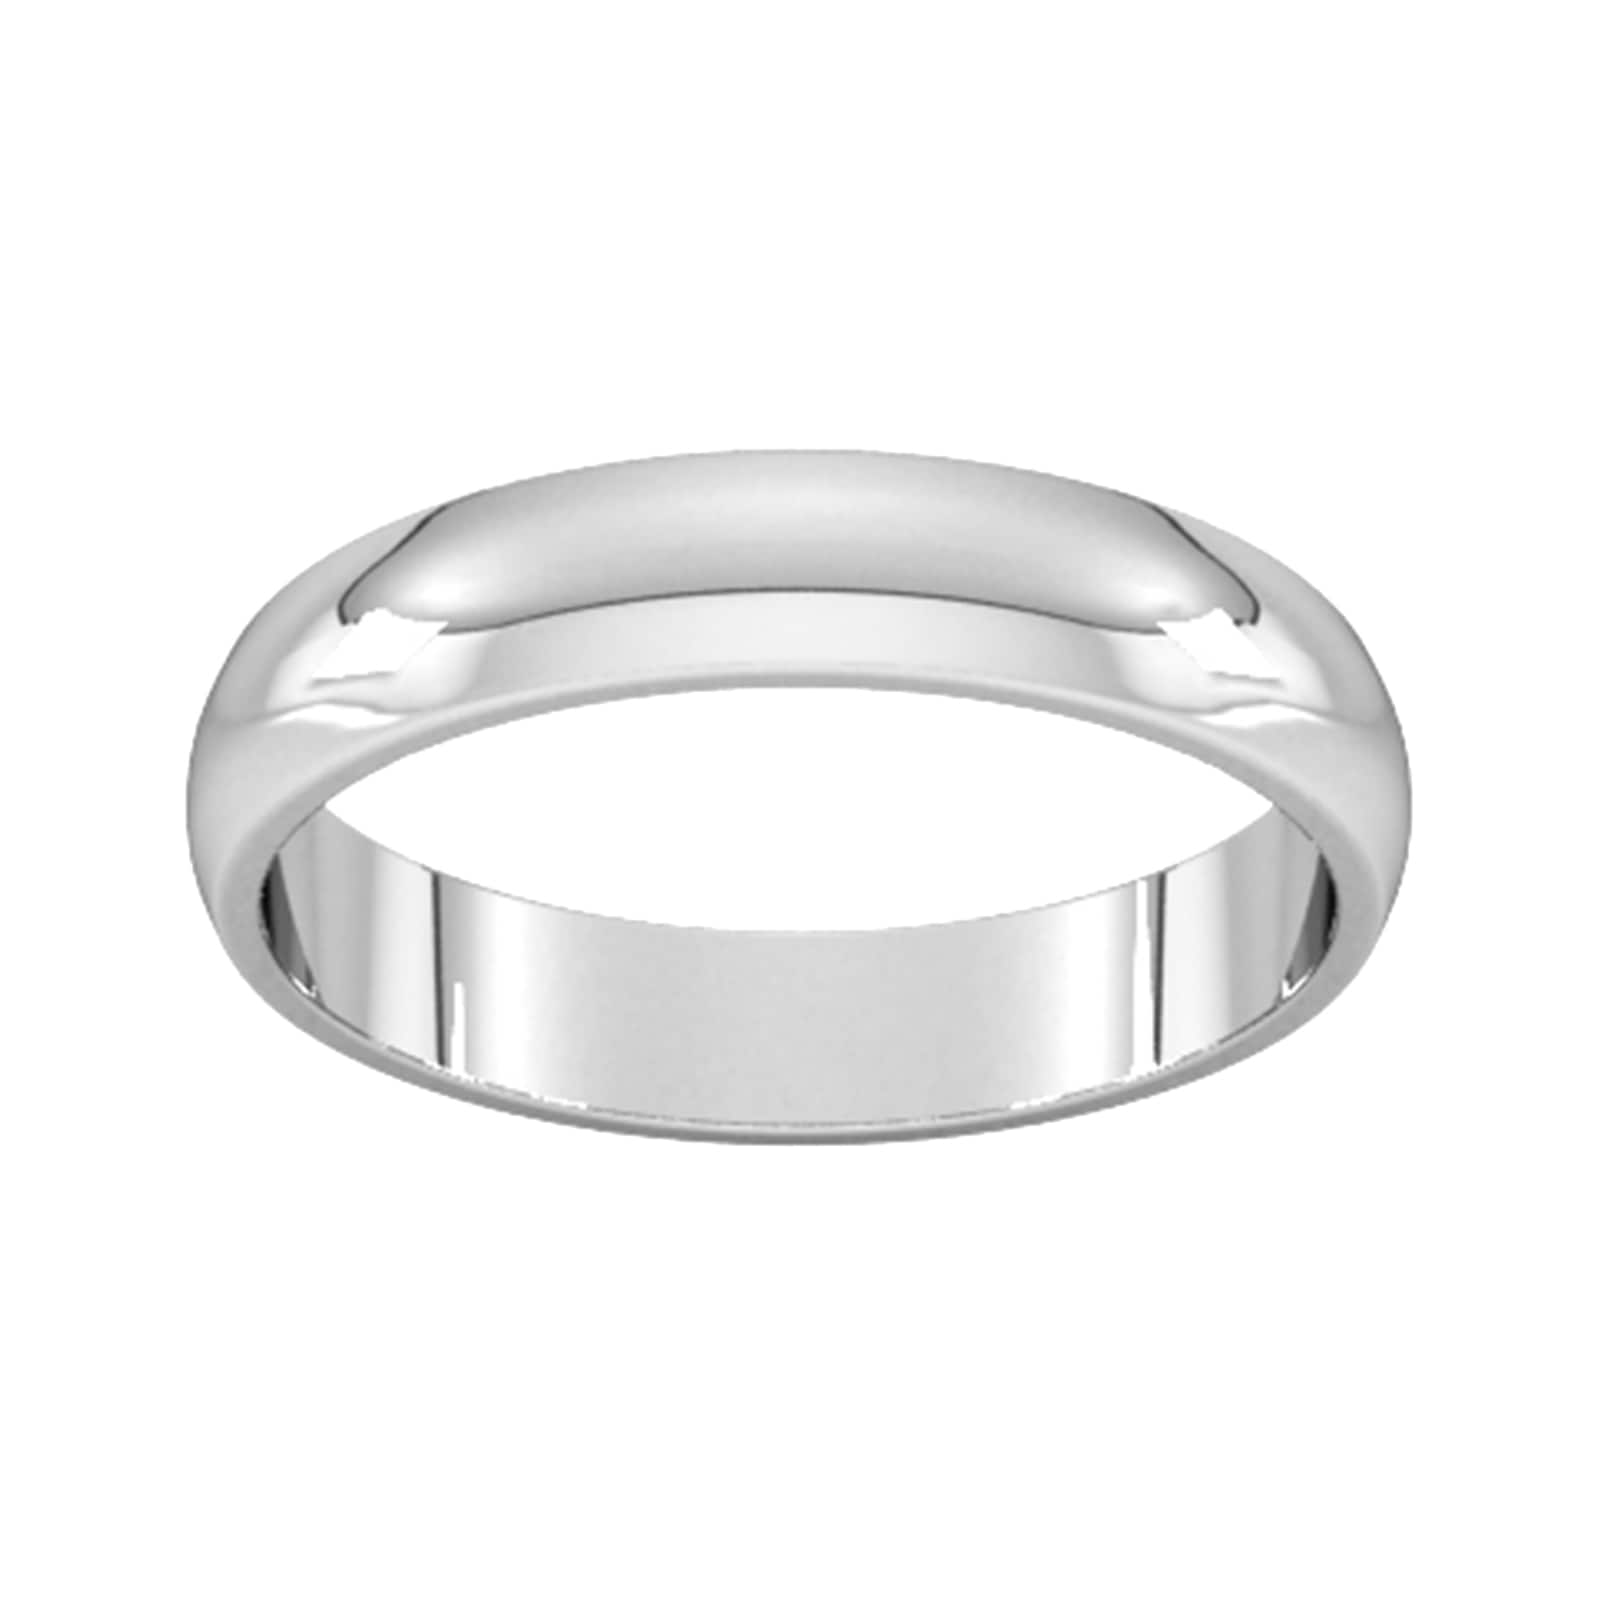 4mm D Shape Standard Wedding Ring In Sterling Silver - Ring Size S